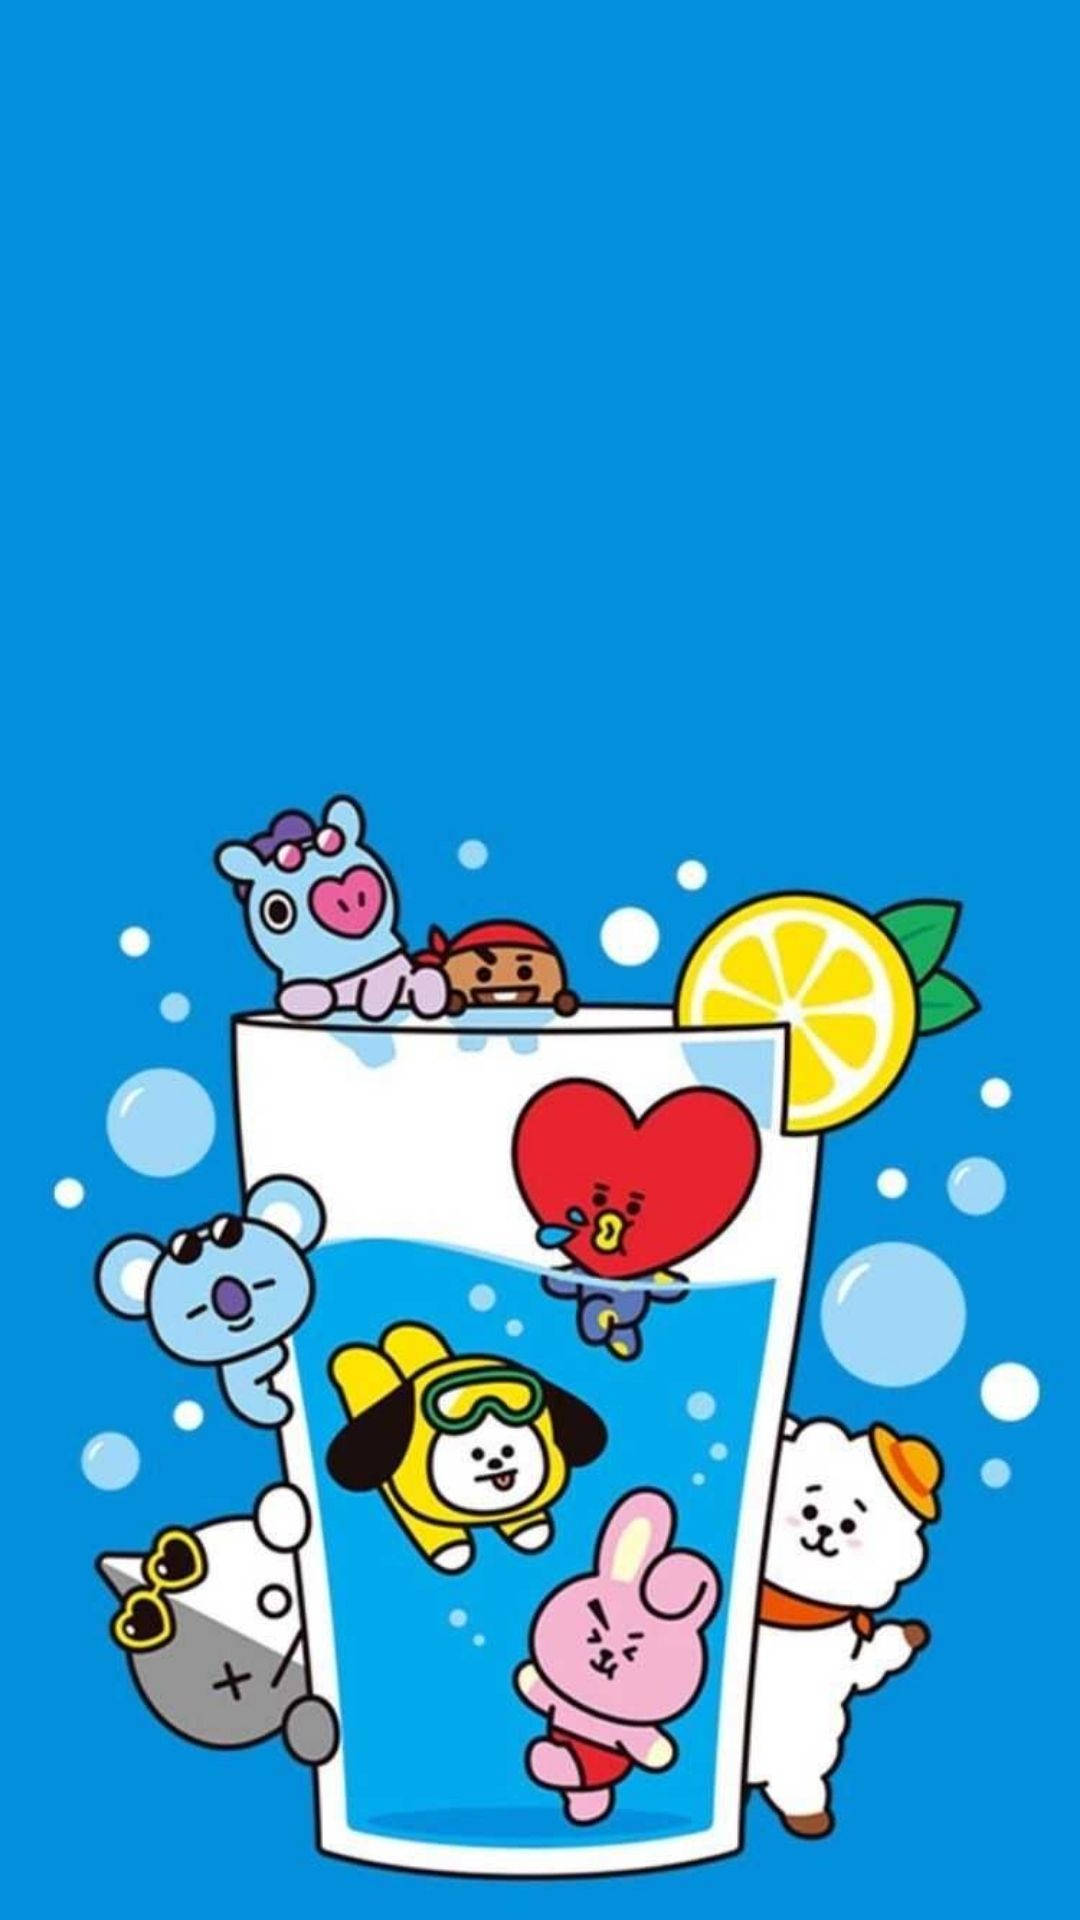 1080X1920 Bt21 Wallpaper and Background